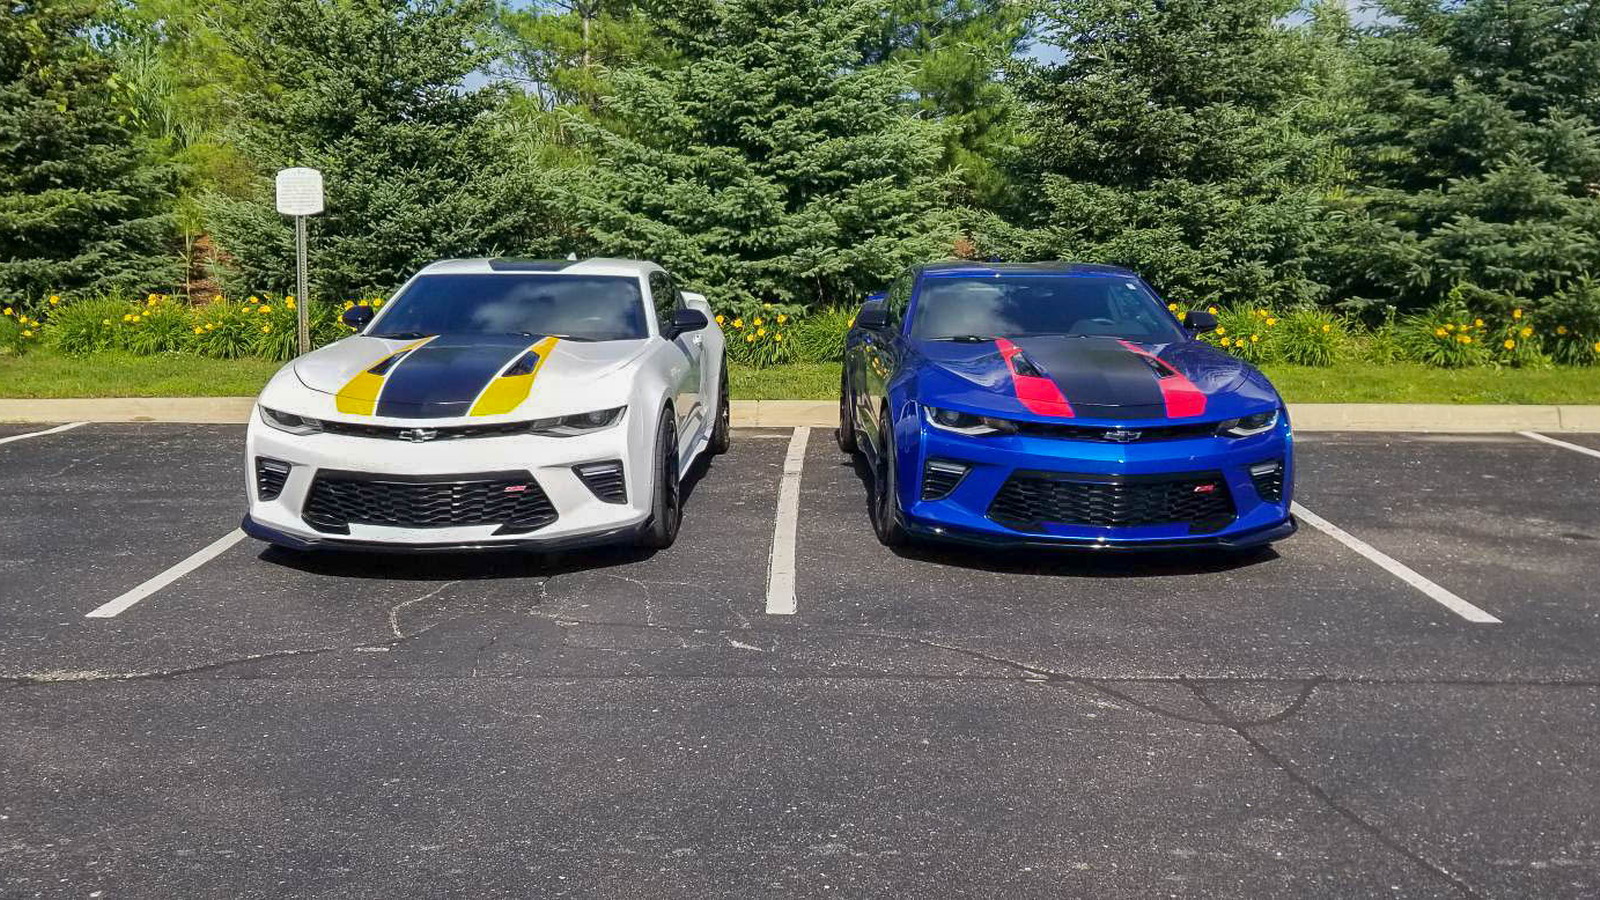 2017 Track Day Performance Camaros 001A and 001B